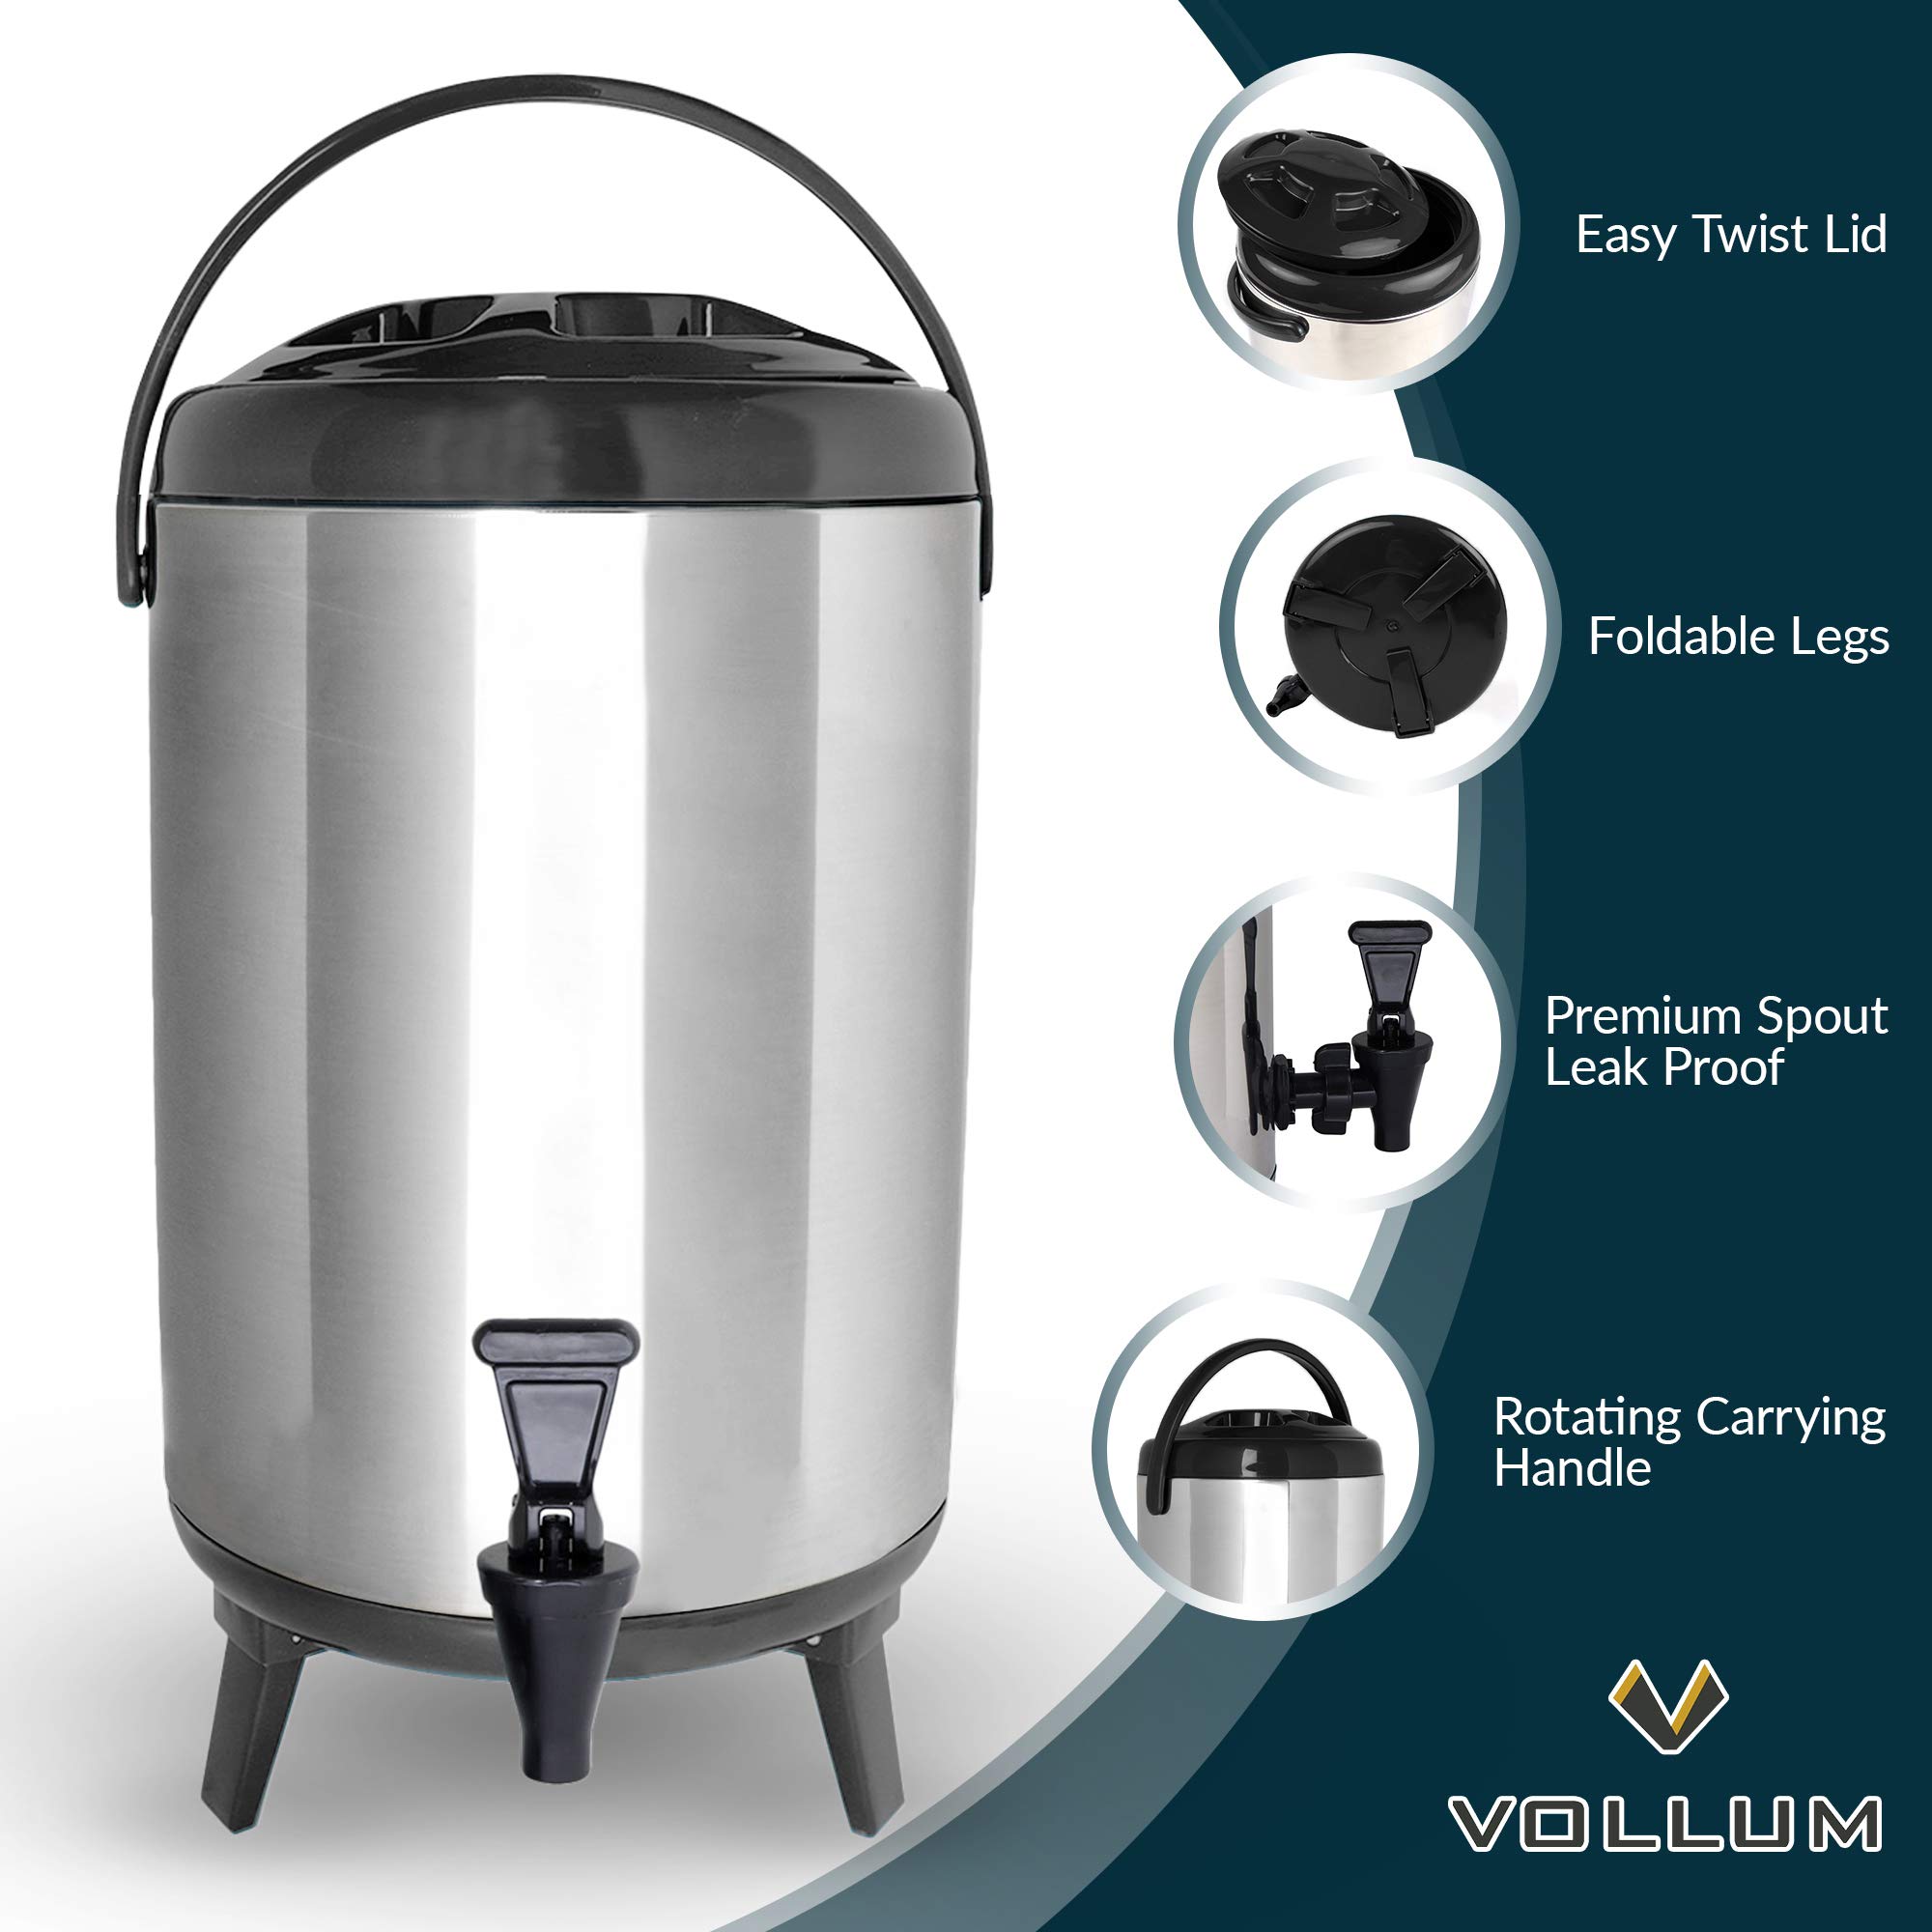 Vollum Stainless Steel Insulated Beverage Dispenser – Insulated Thermal Hot and Cold Coffee Carafe – 12 Liter Drink Dispenser with Spigot for Hot Water, Tea & Coffee, Cold Milk, Juice & More BLACK